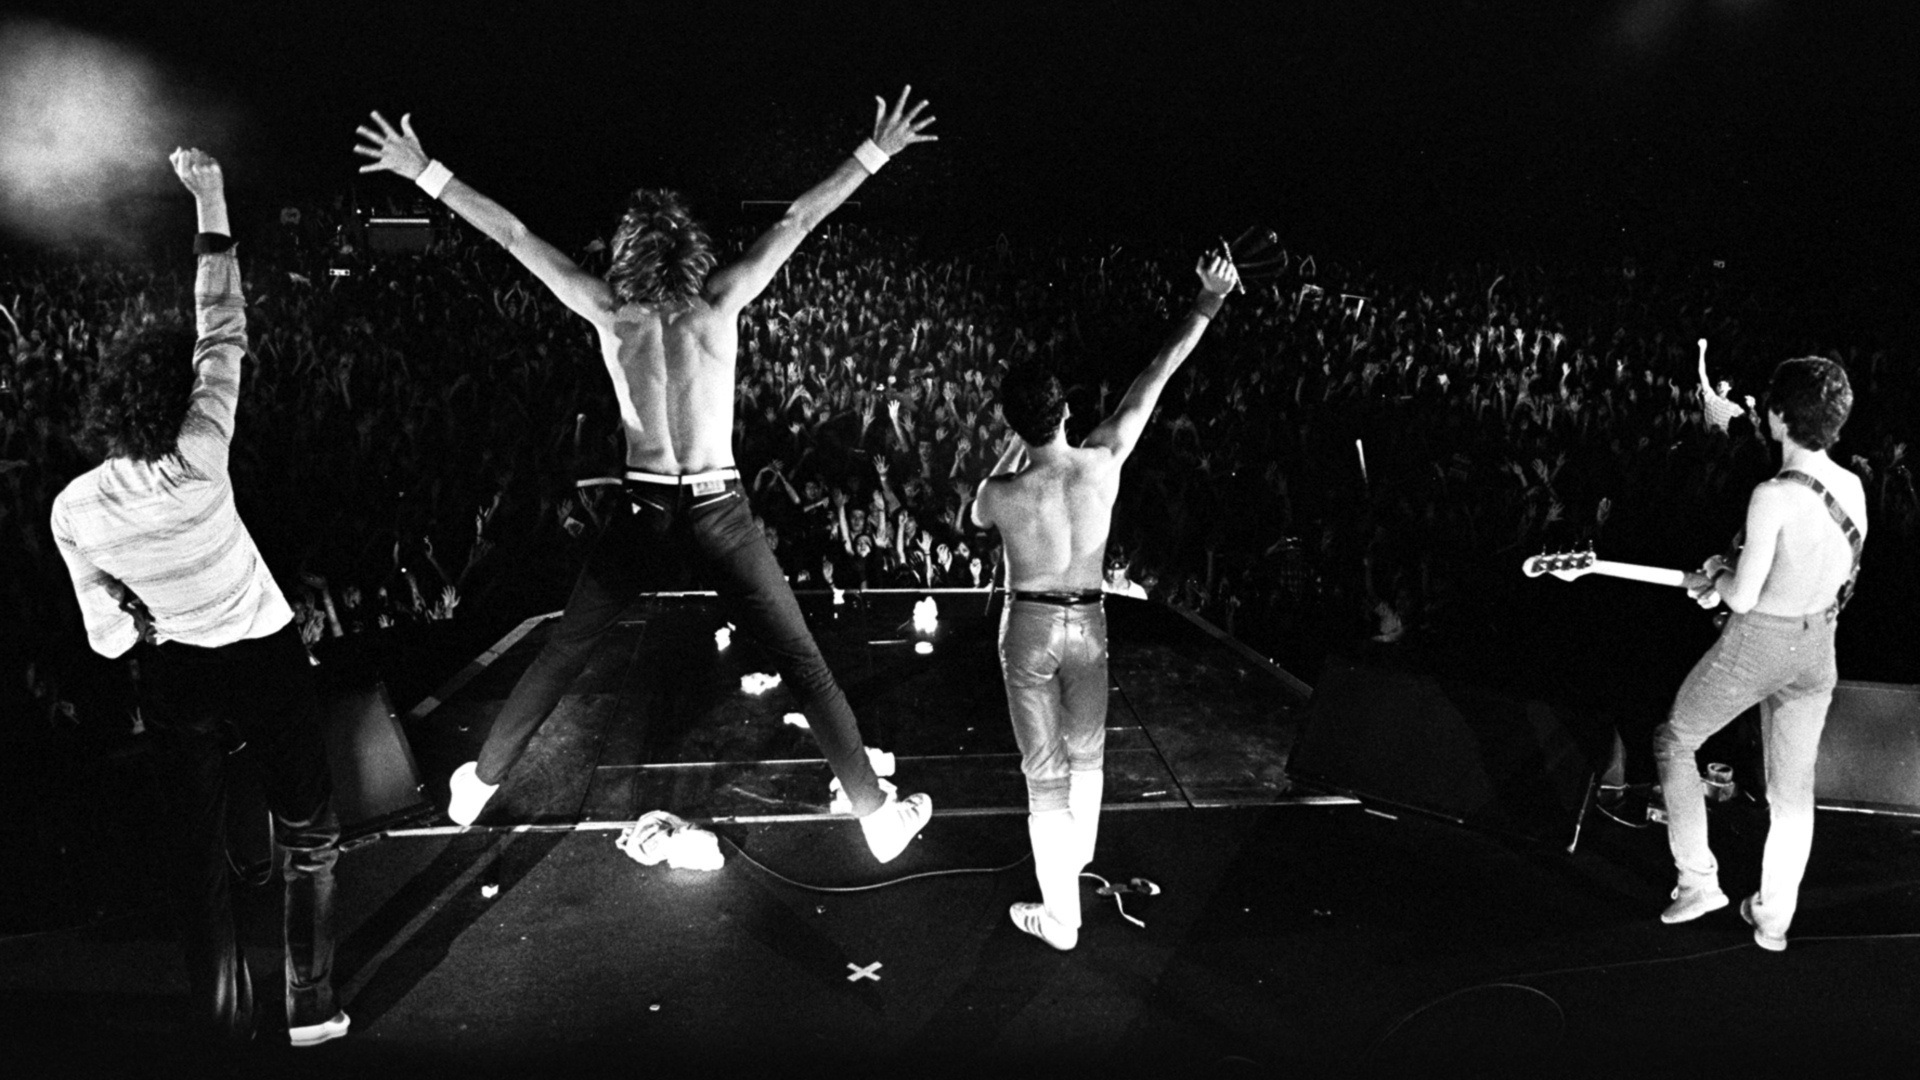 Concert: Queen, Classic rock, Black and white, Showcasing established icons. 1920x1080 Full HD Wallpaper.